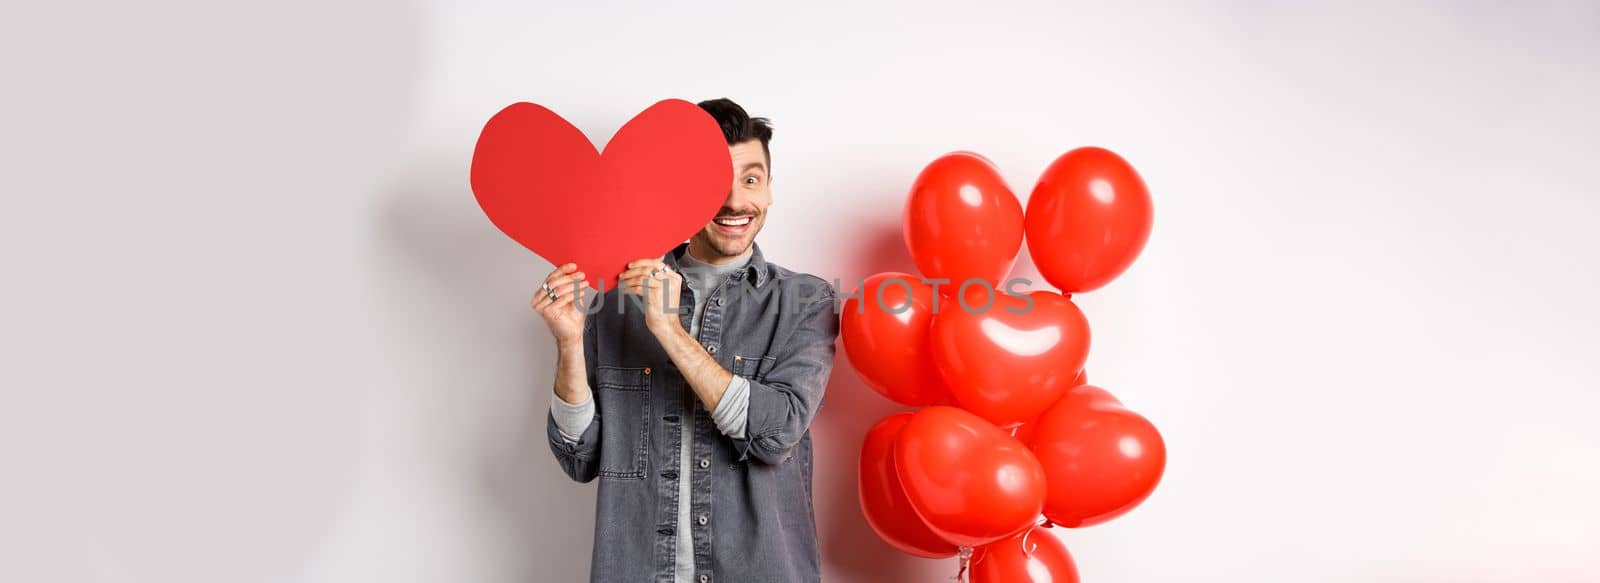 Romantic smiling man cover face with Valentine heart card and looking happy at camera, celebrating lovers day with partner, standing on white background.